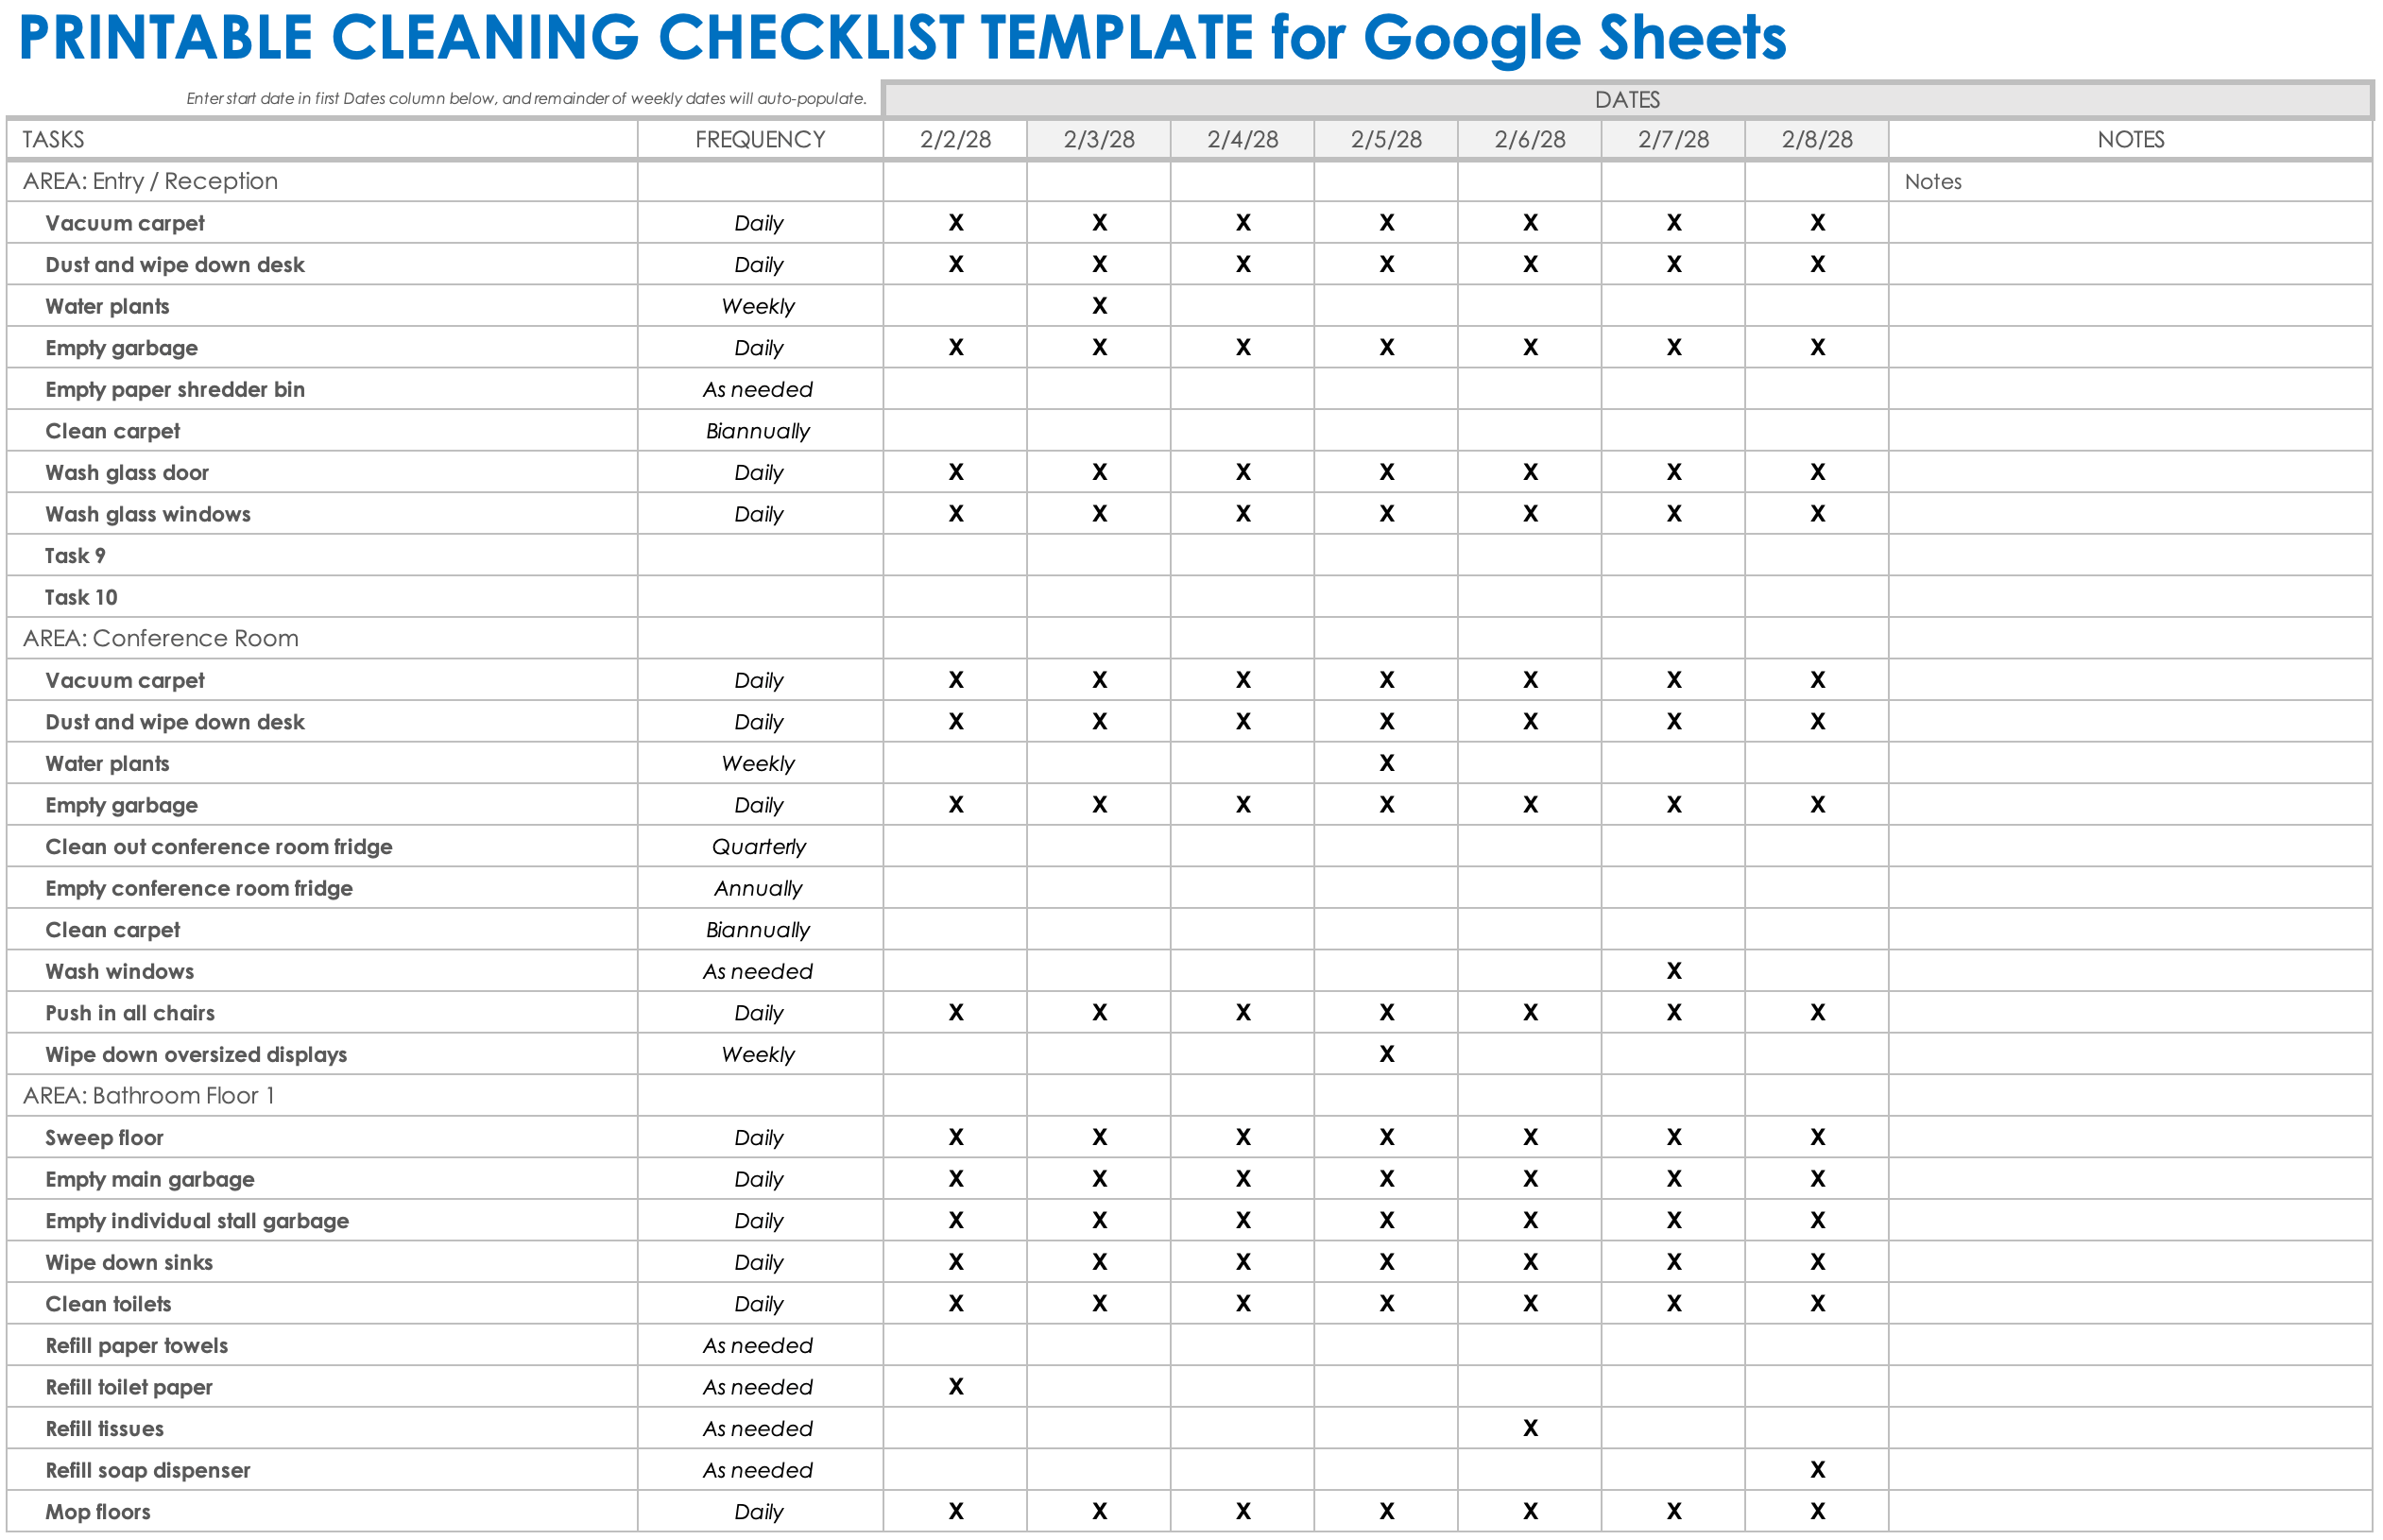 Printable Cleaning Checklist Template for Google Sheets